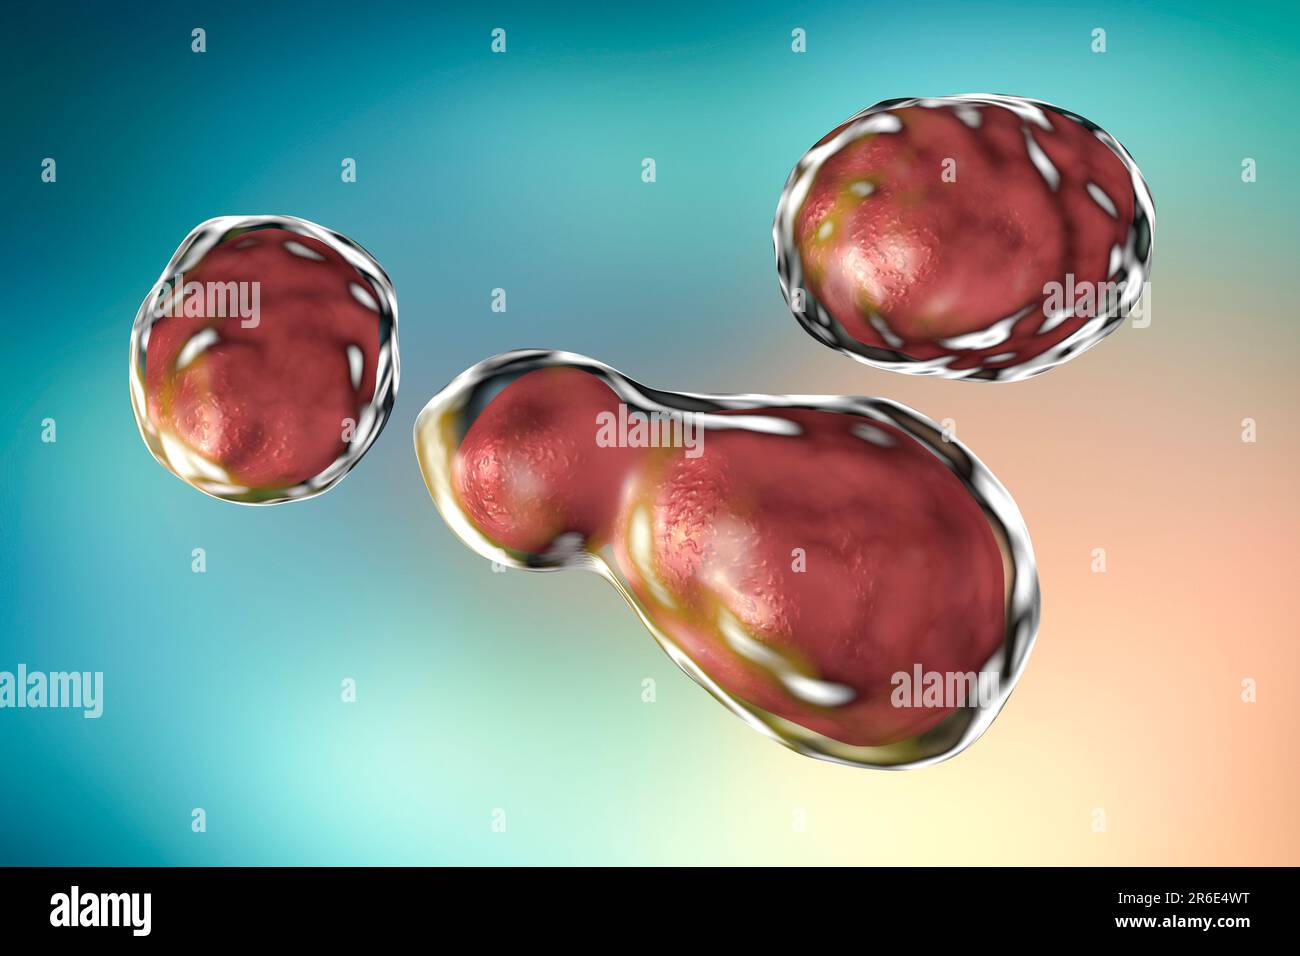 Cryptococcus neoformans fungus, computer illustration. C. neoformans is a yeast-like fungus that reproduces by budding. An acidic mucopolysaccharide c Stock Photo